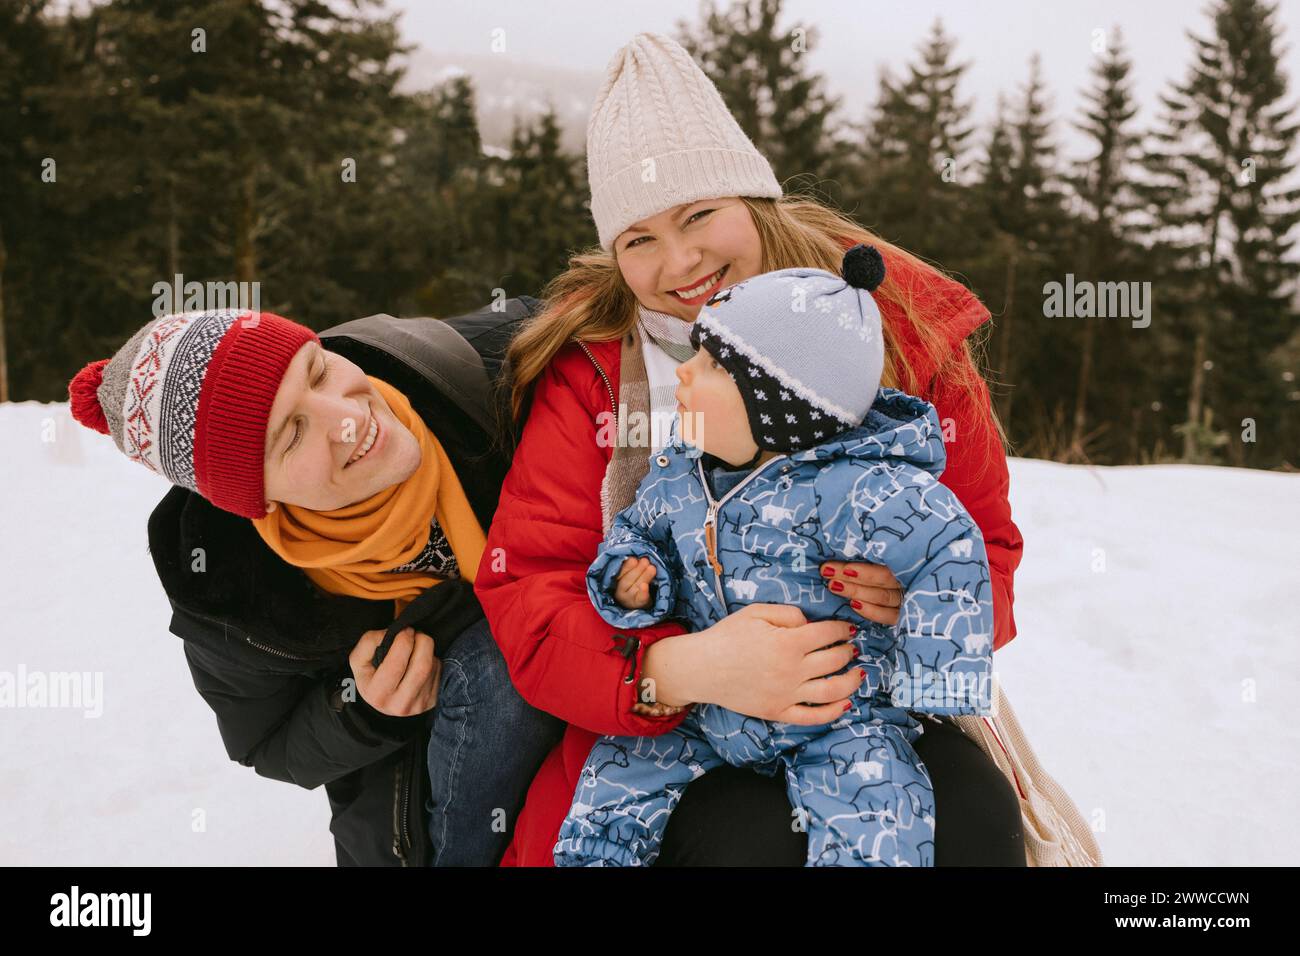 Smiling woman with baby boy near man in winter forest Stock Photo